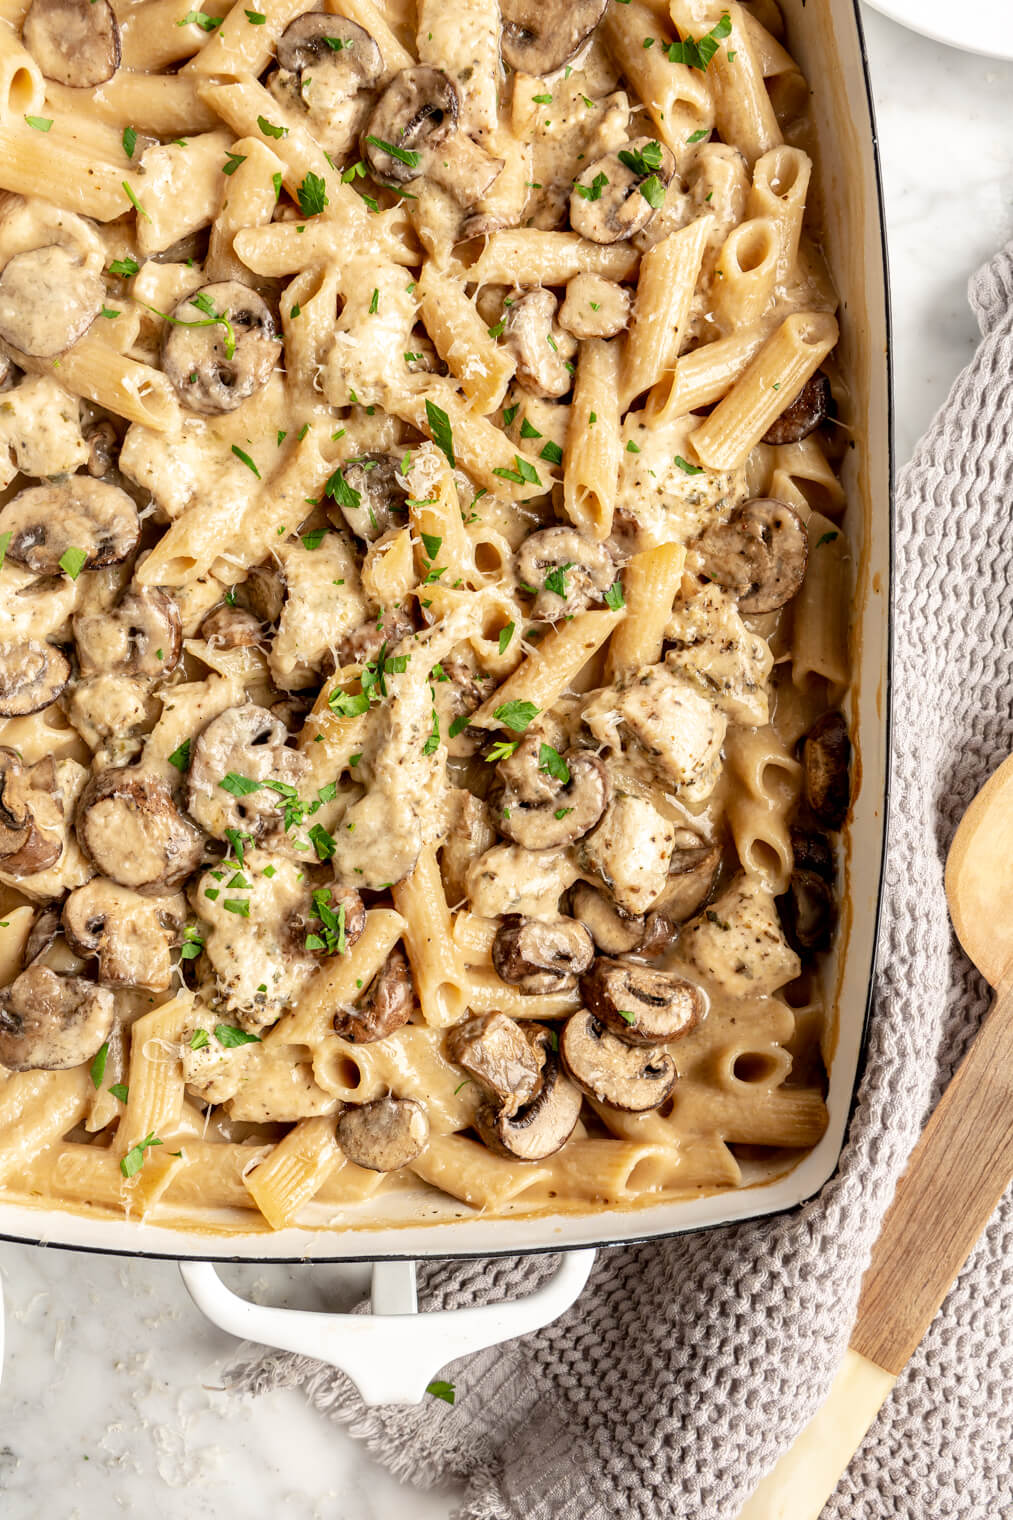 Pasta meal kit: not the classic alfredo pasta - My Cooking Box